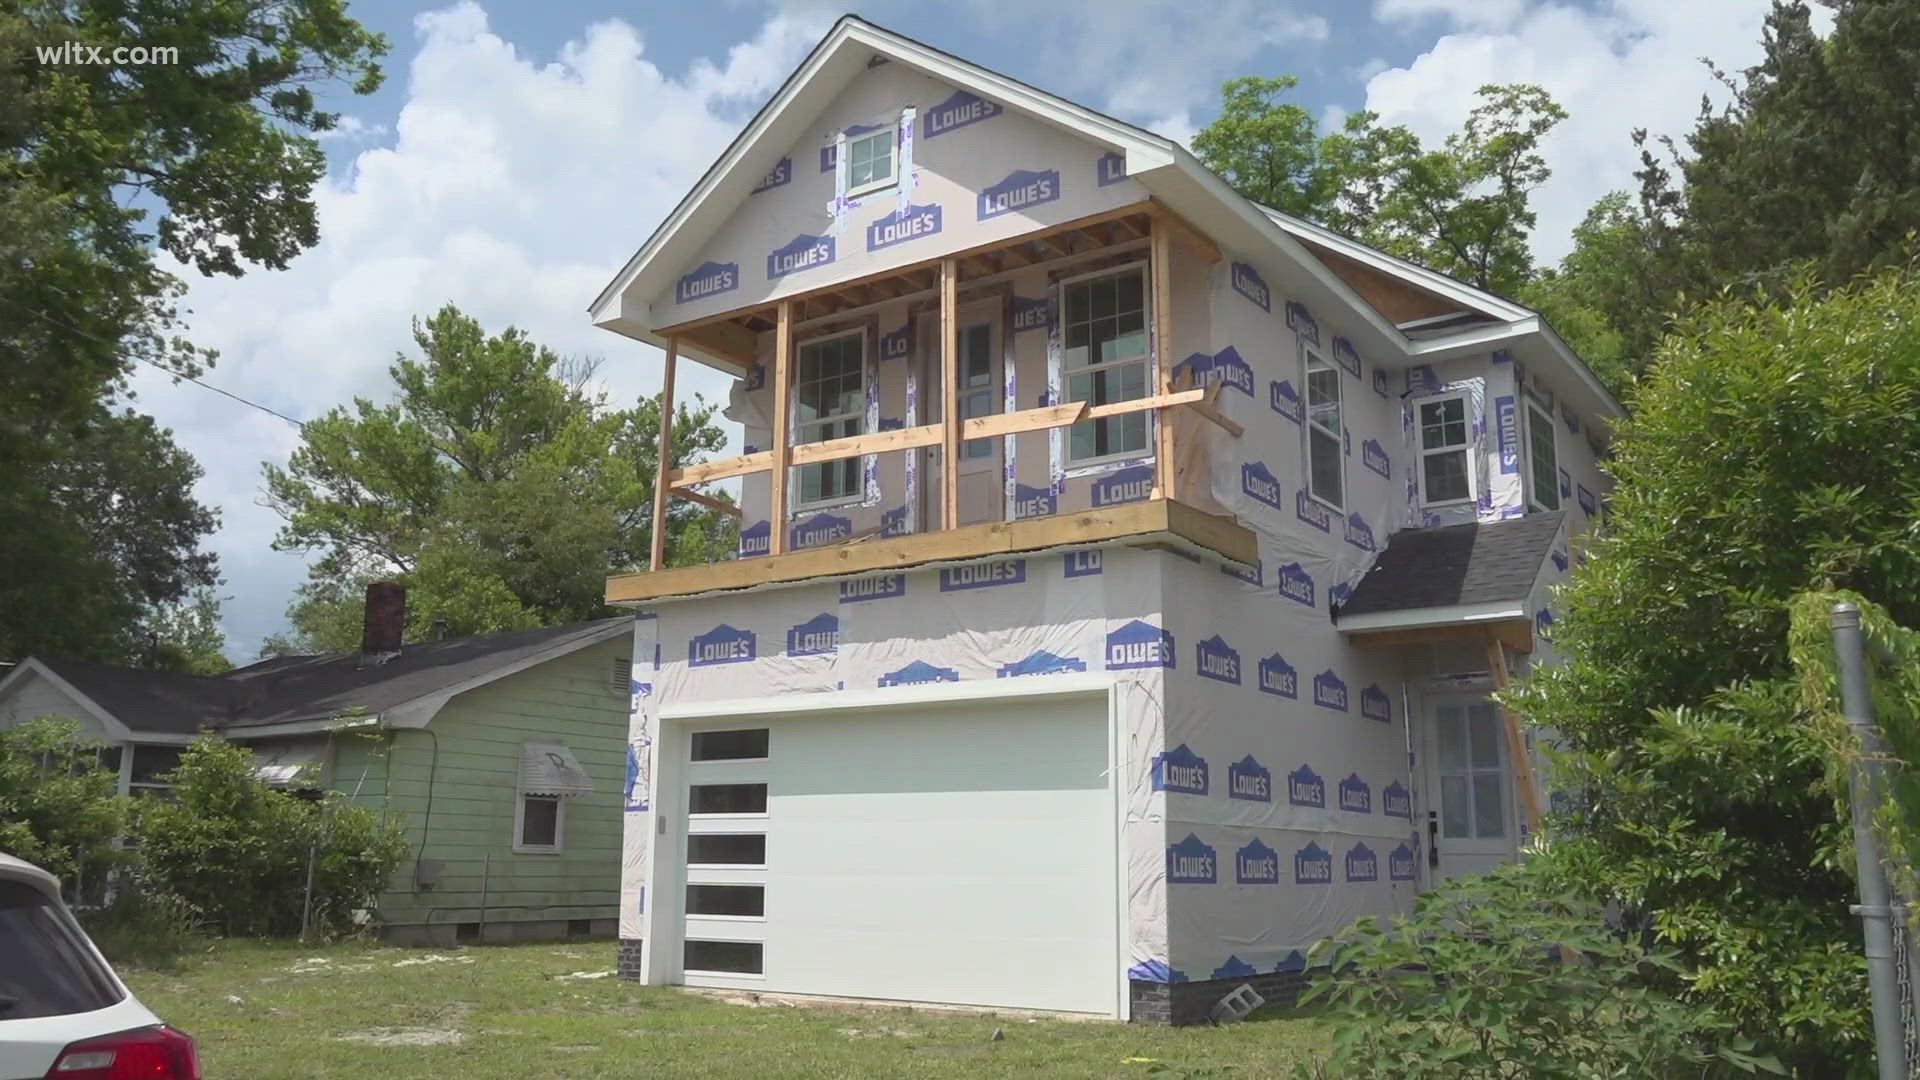 Affordable housing is coming to the South Sumter area as one man works to create a community in his hometown.